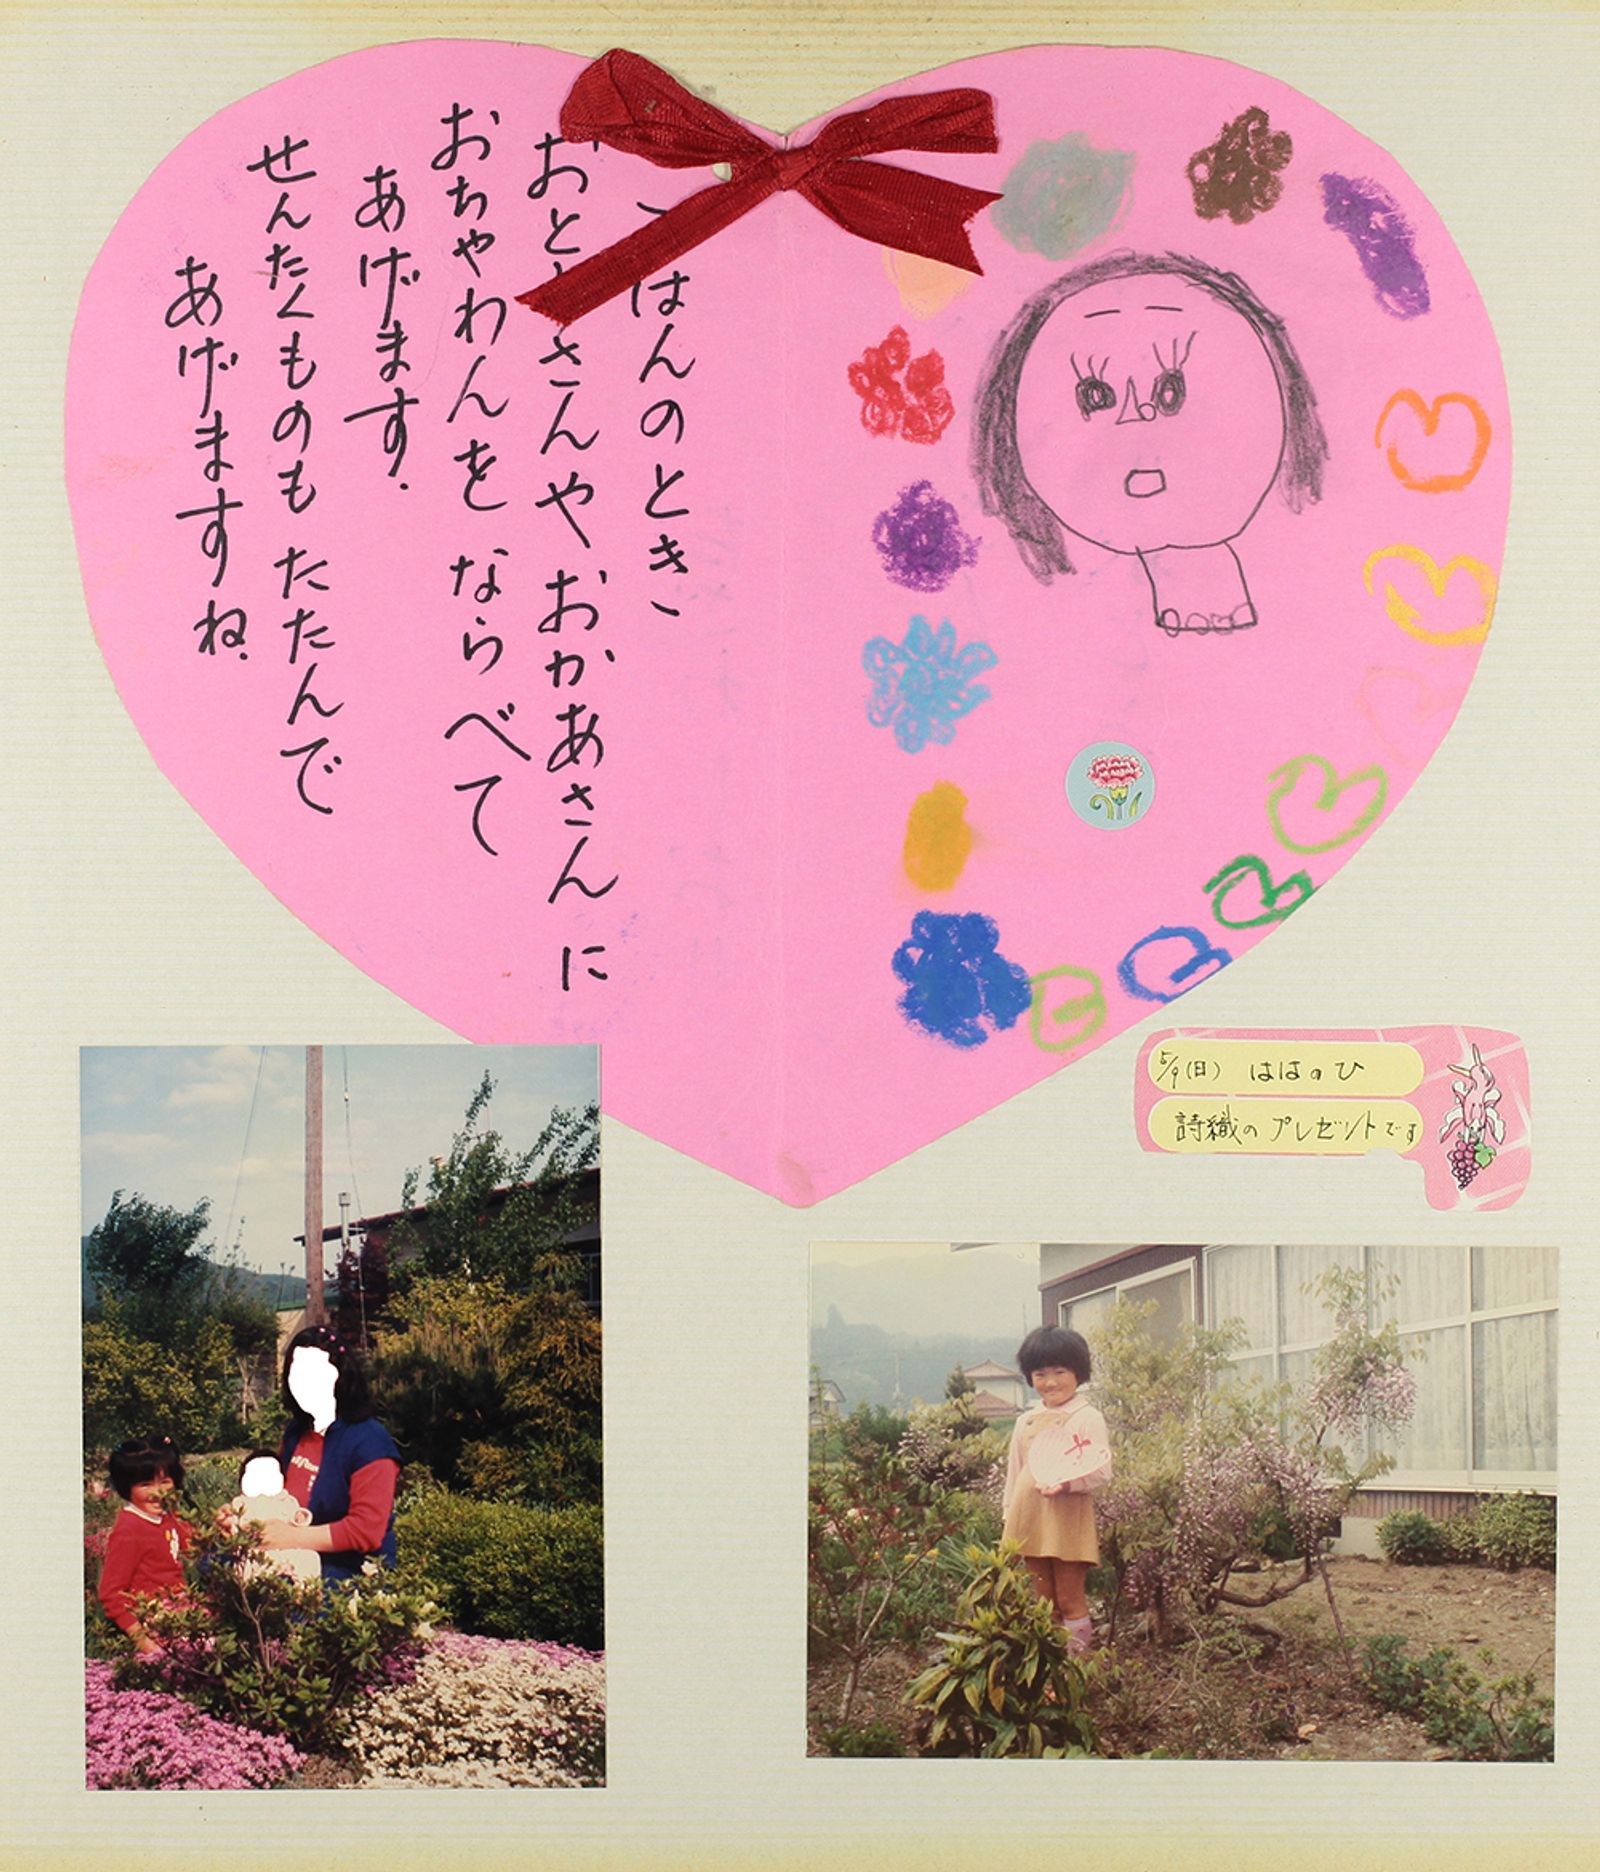 Visualising the Effects of Child Abuse in Japan